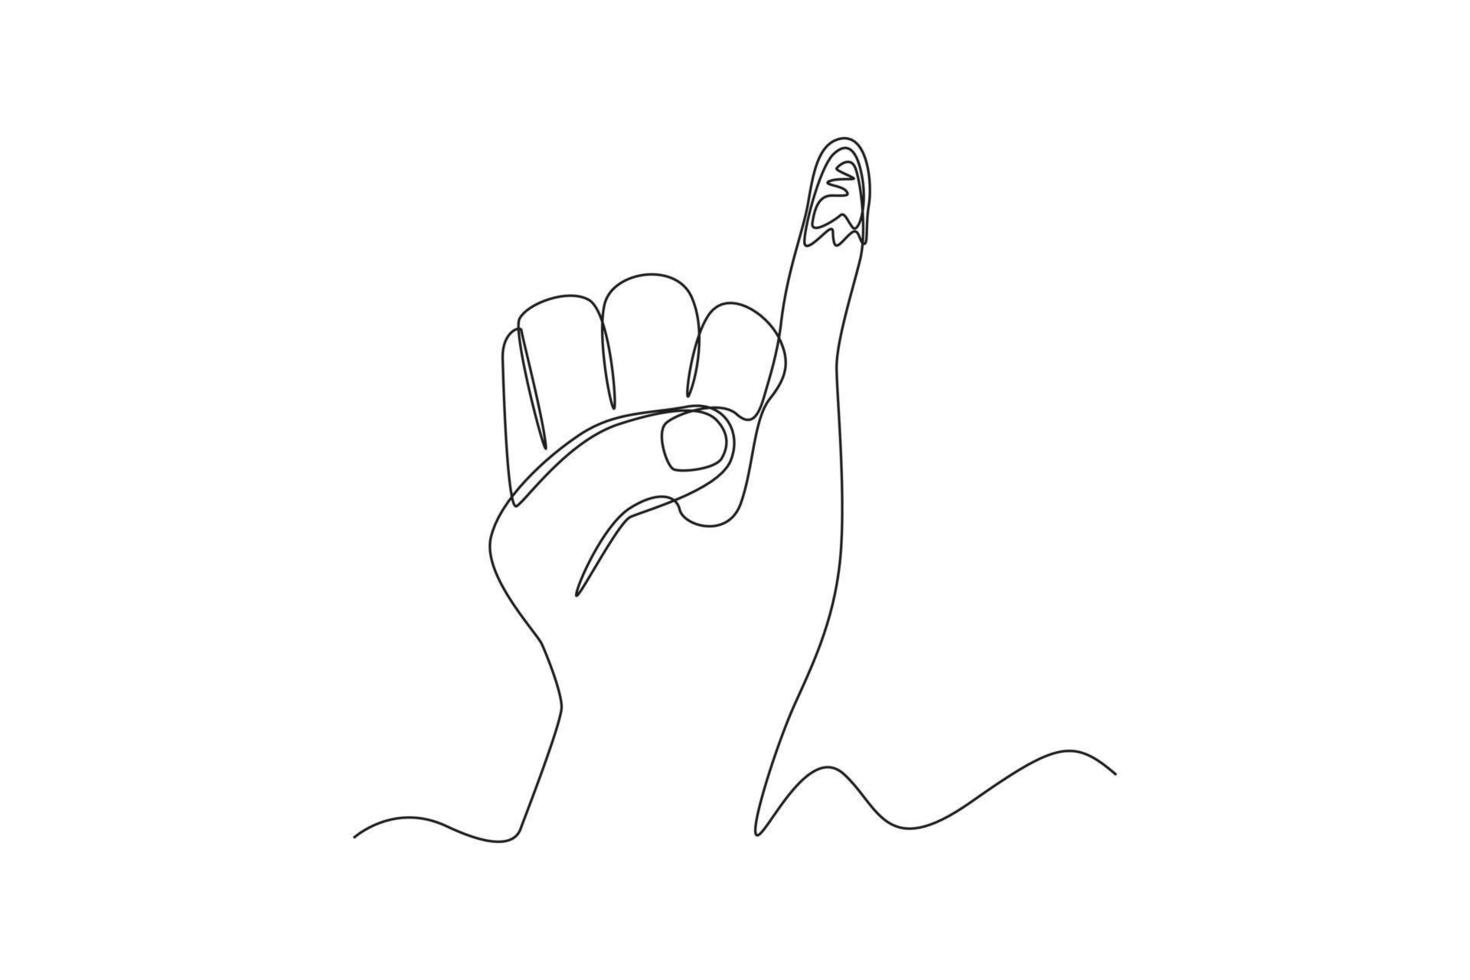 Continuous one line drawing ink mark on the little finger has voted for General Regional or Presidential Election. Voting concept. Single line draw design vector graphic illustration.